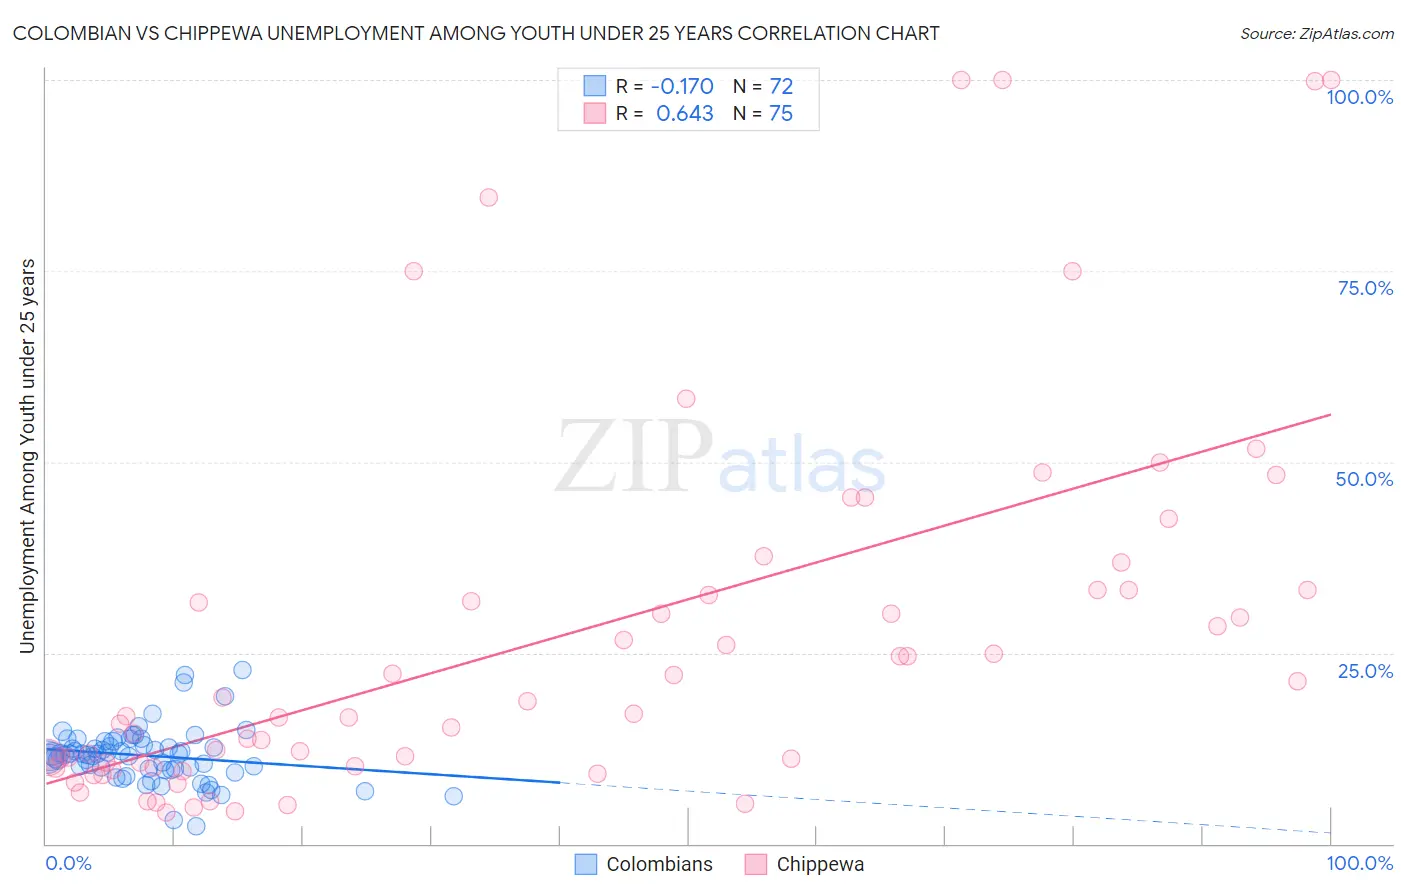 Colombian vs Chippewa Unemployment Among Youth under 25 years